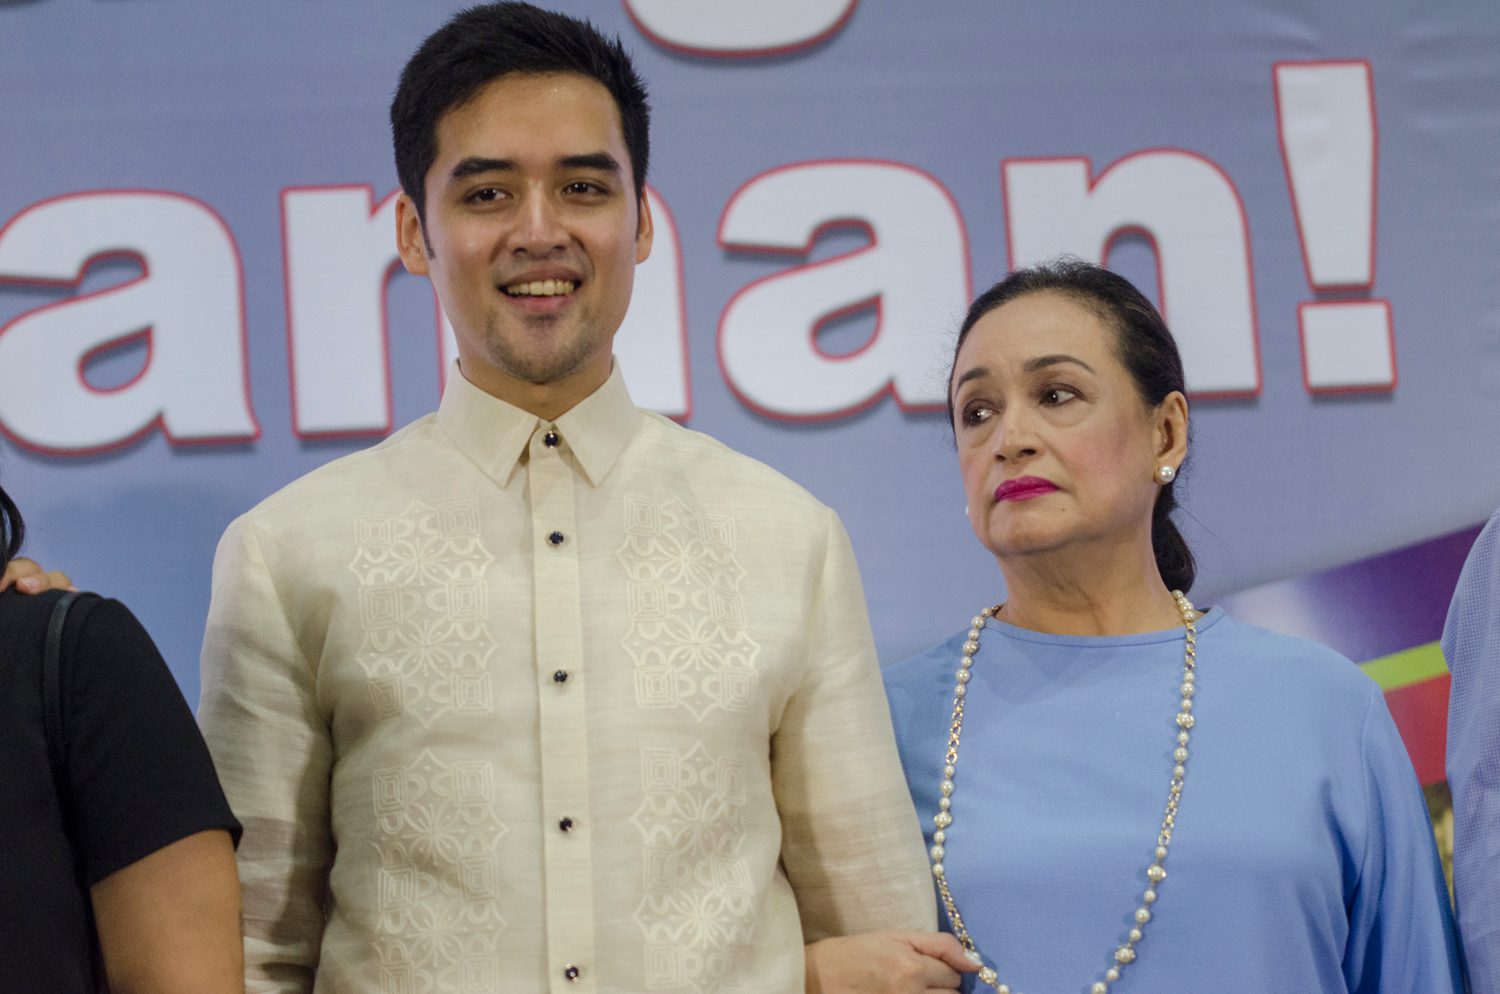 Coney Reyes tells team, supporters of son Vico Sotto: ‘Thank you to all’